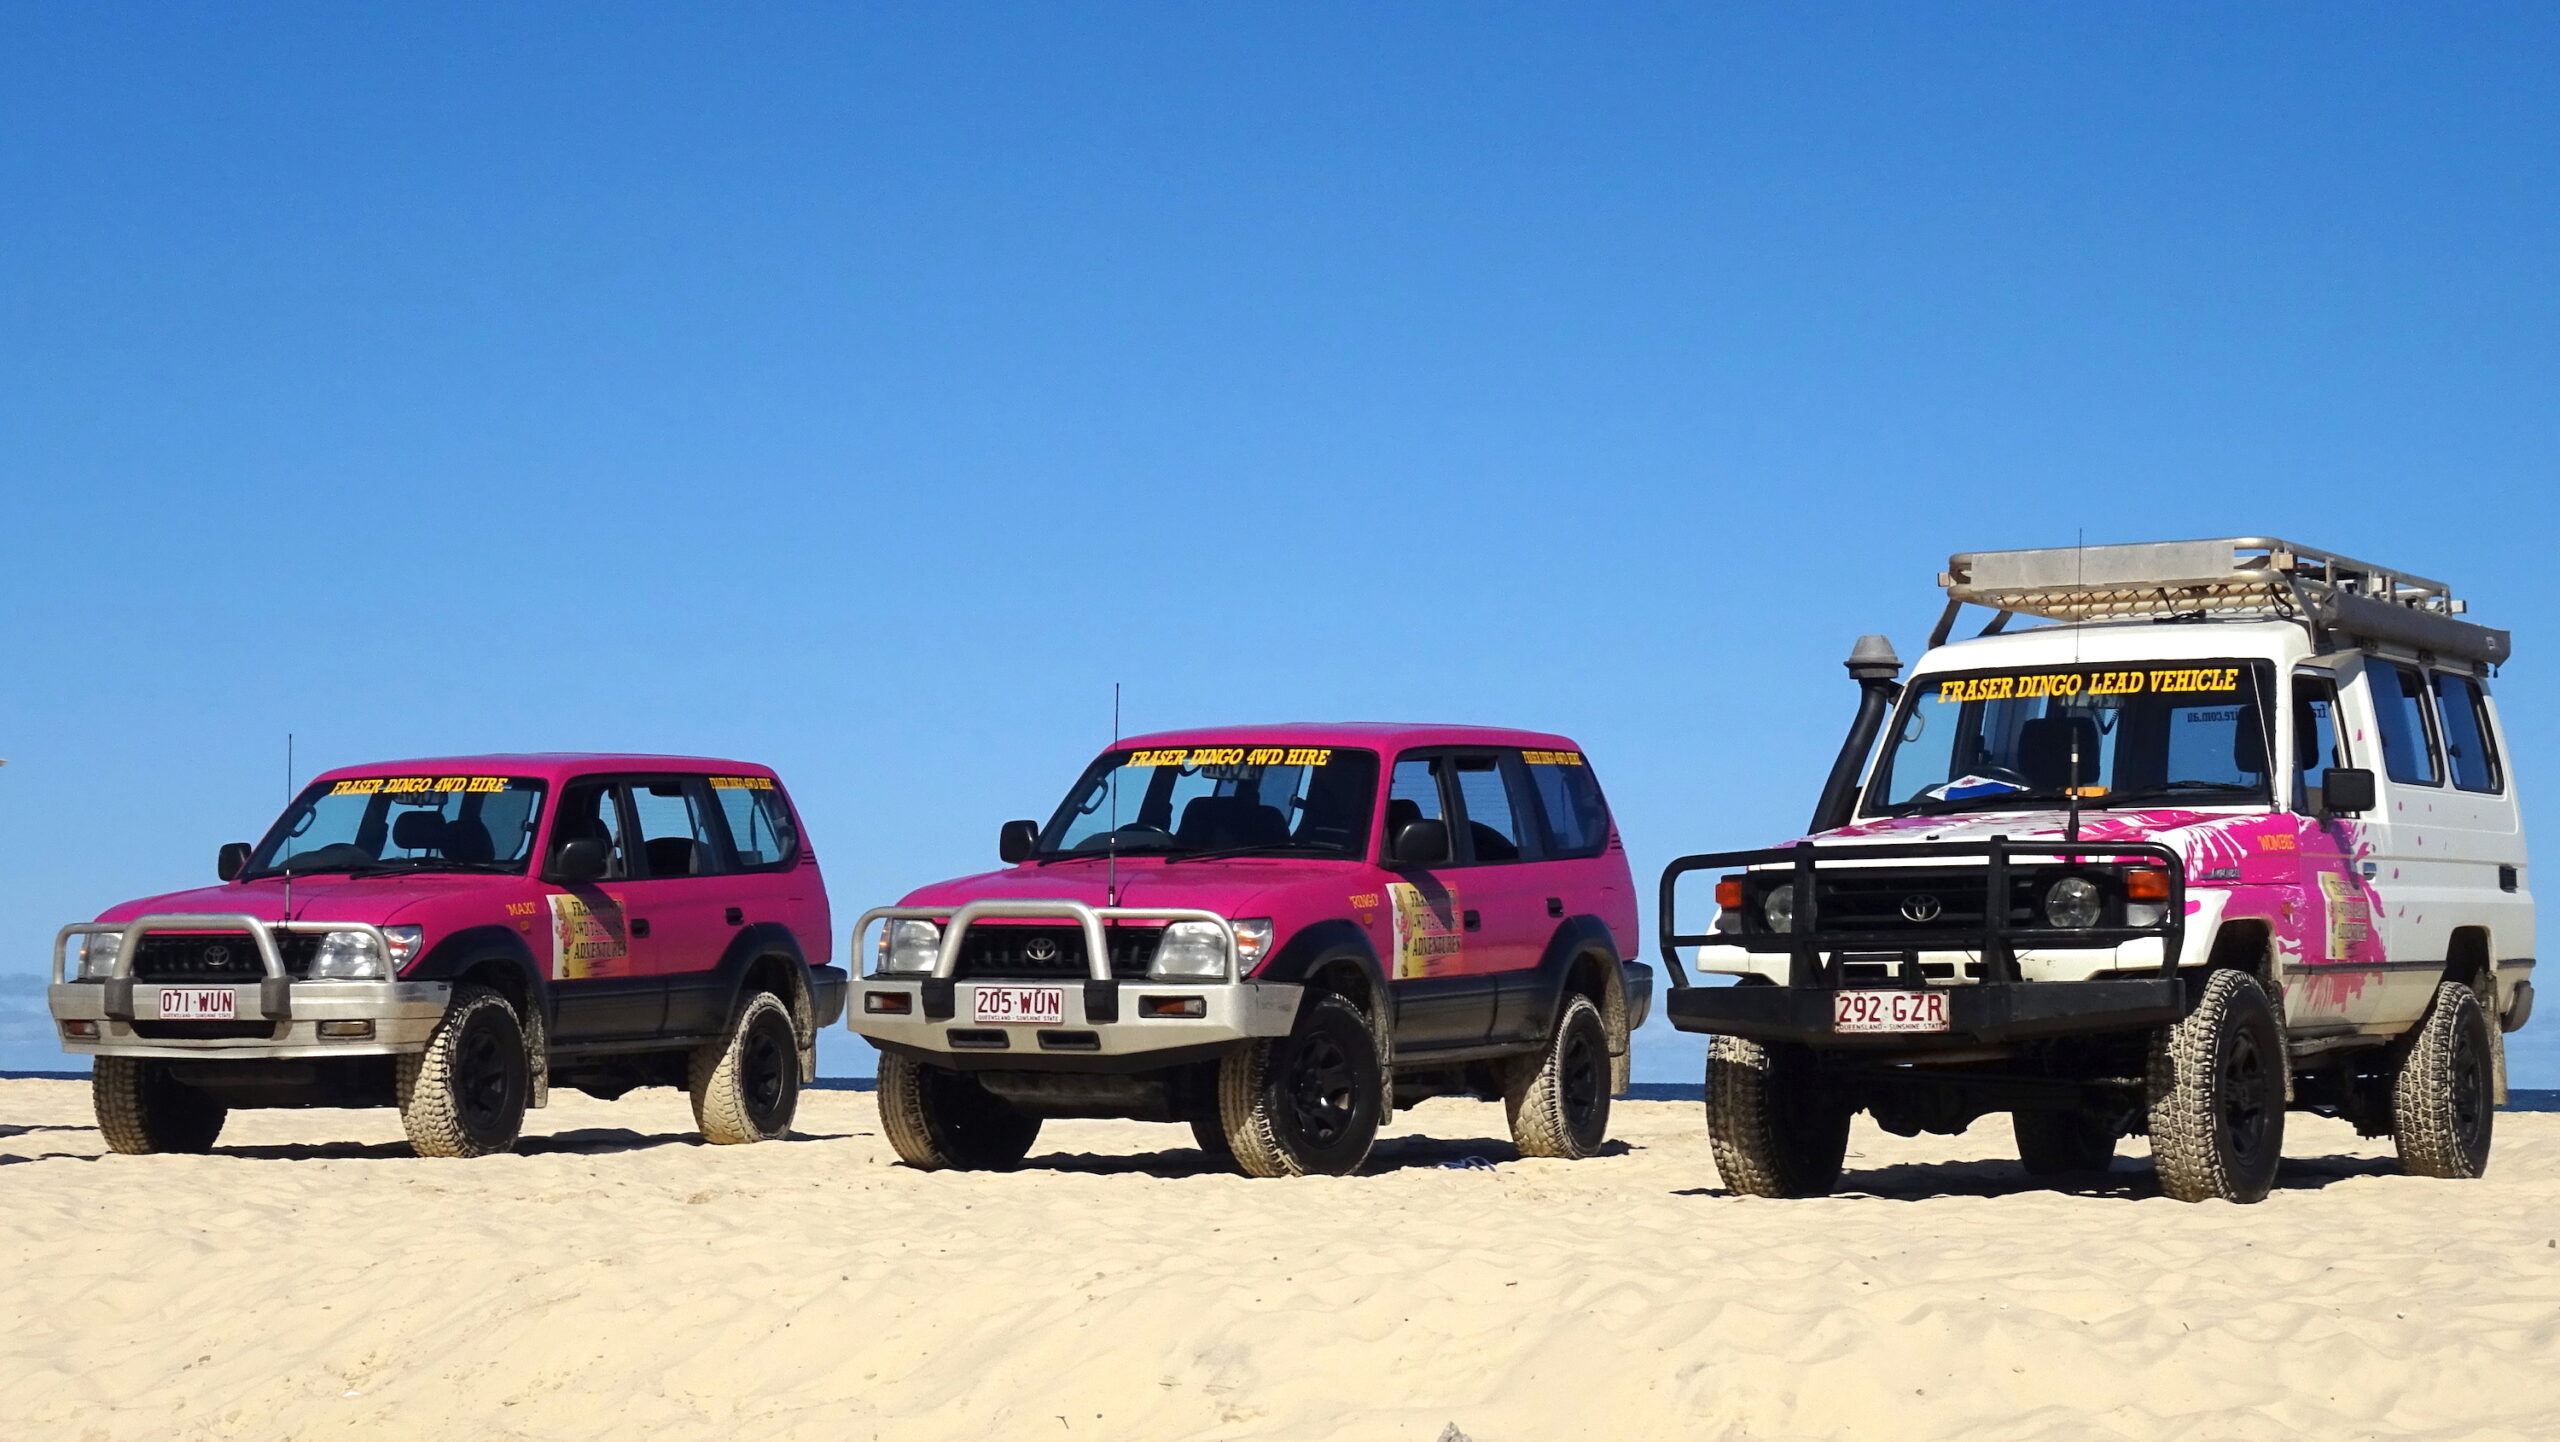 Fraser Island Tagalong Tour 3 Day